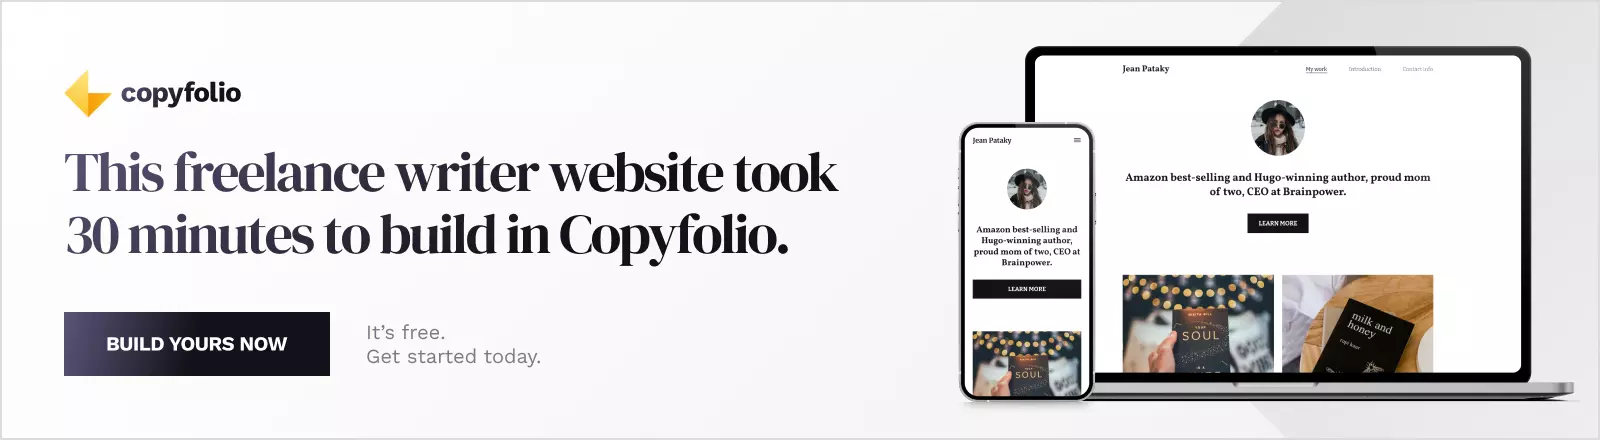 Banner saying: this freelance writer website took 30 minutes to build in Copyfolio. Build yours now!